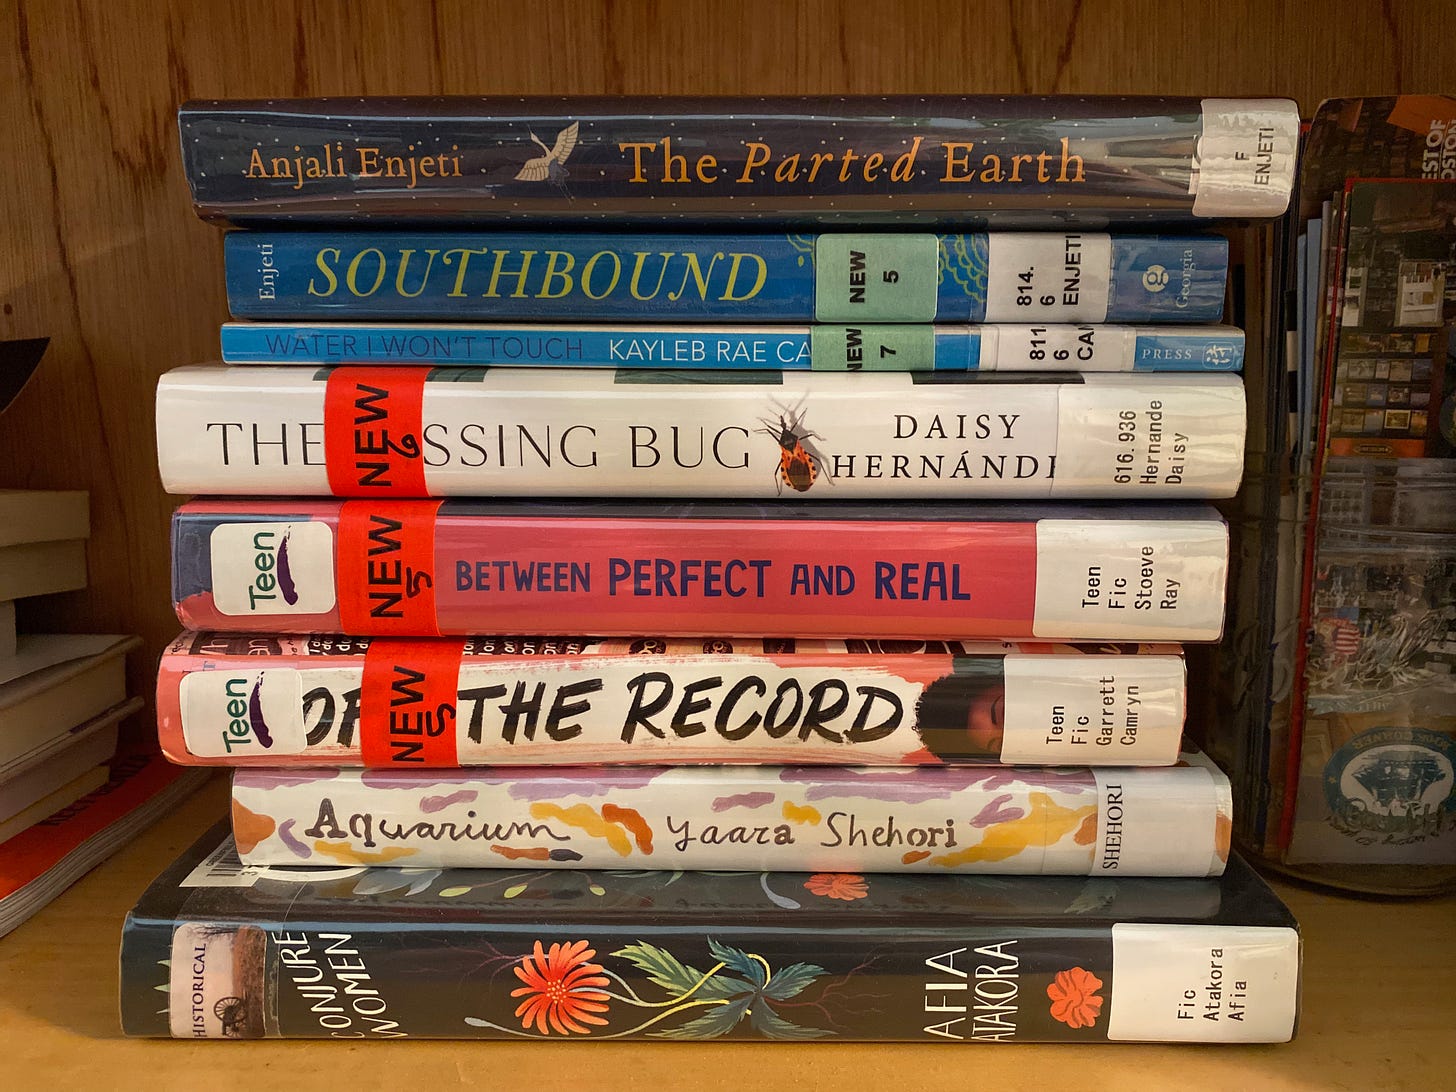 A stack of library books next to a glass jar full of bookmarks. The books are: Conjure Women, Aquarium, Off the Record, Between Perfect and Real, The Kissing Bug, Water I Won’t Touch, Southbound, and The Parted Earth.